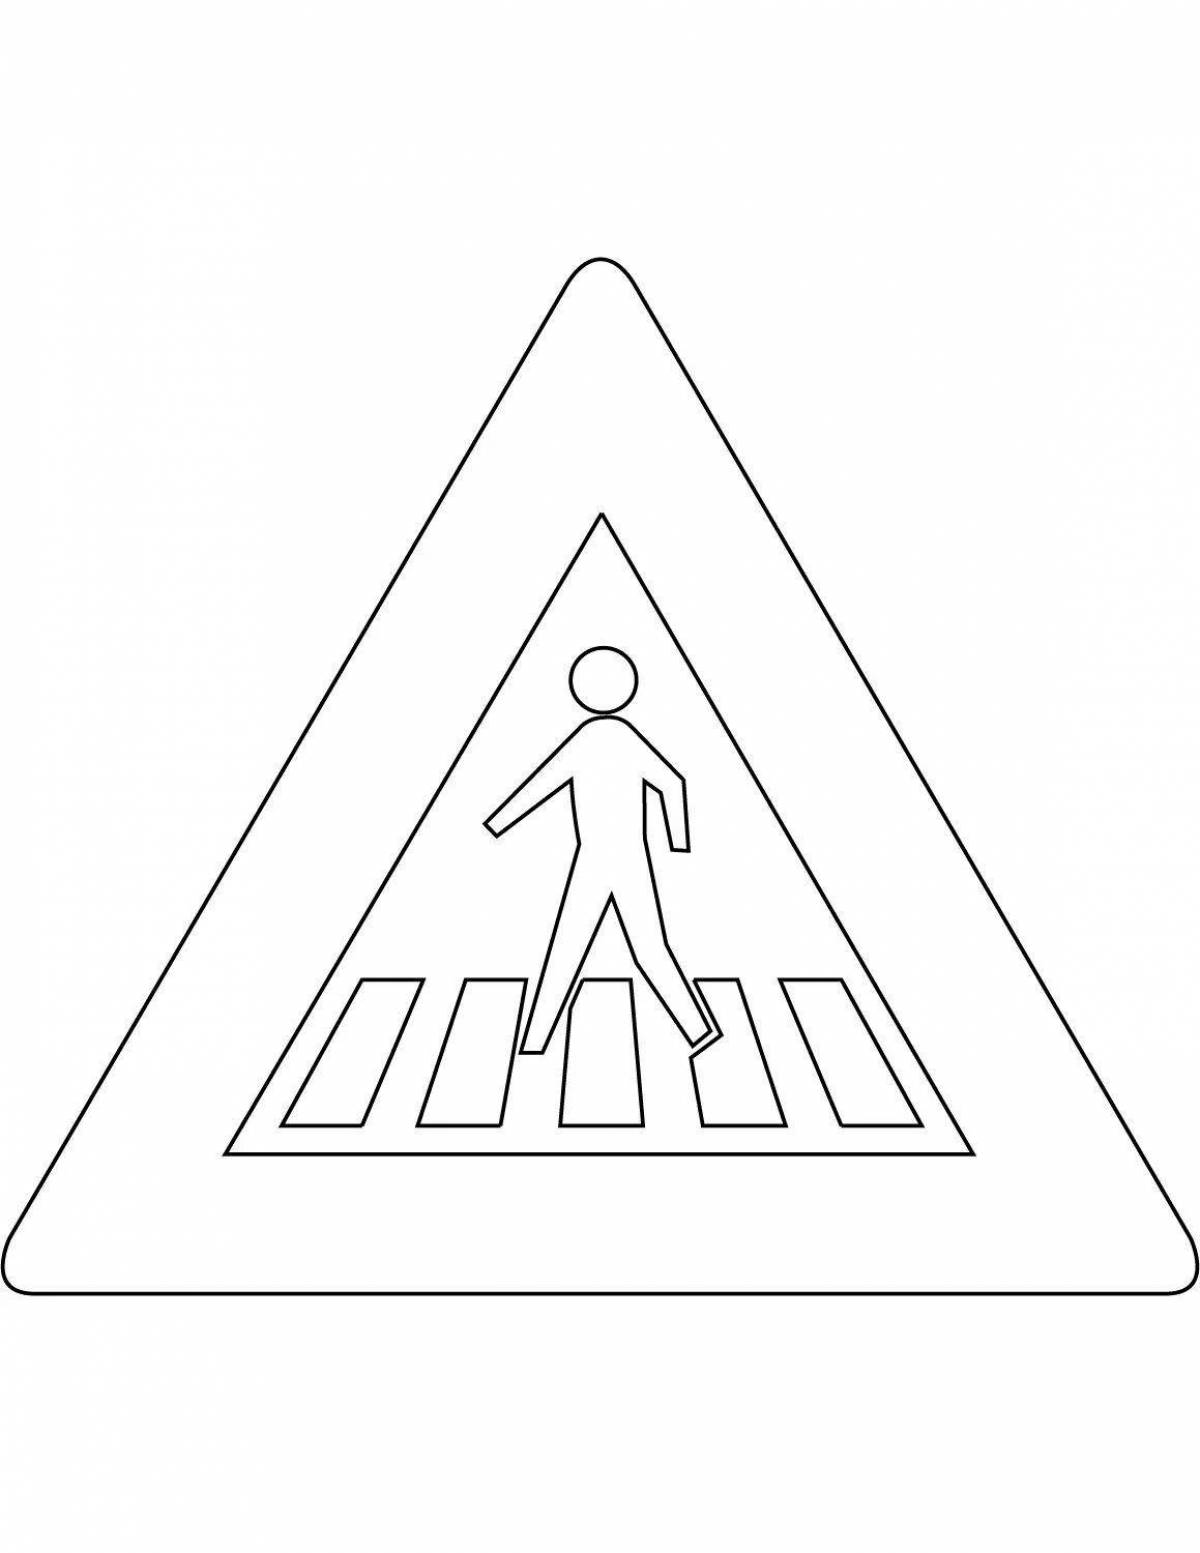 Child crossing sign #1